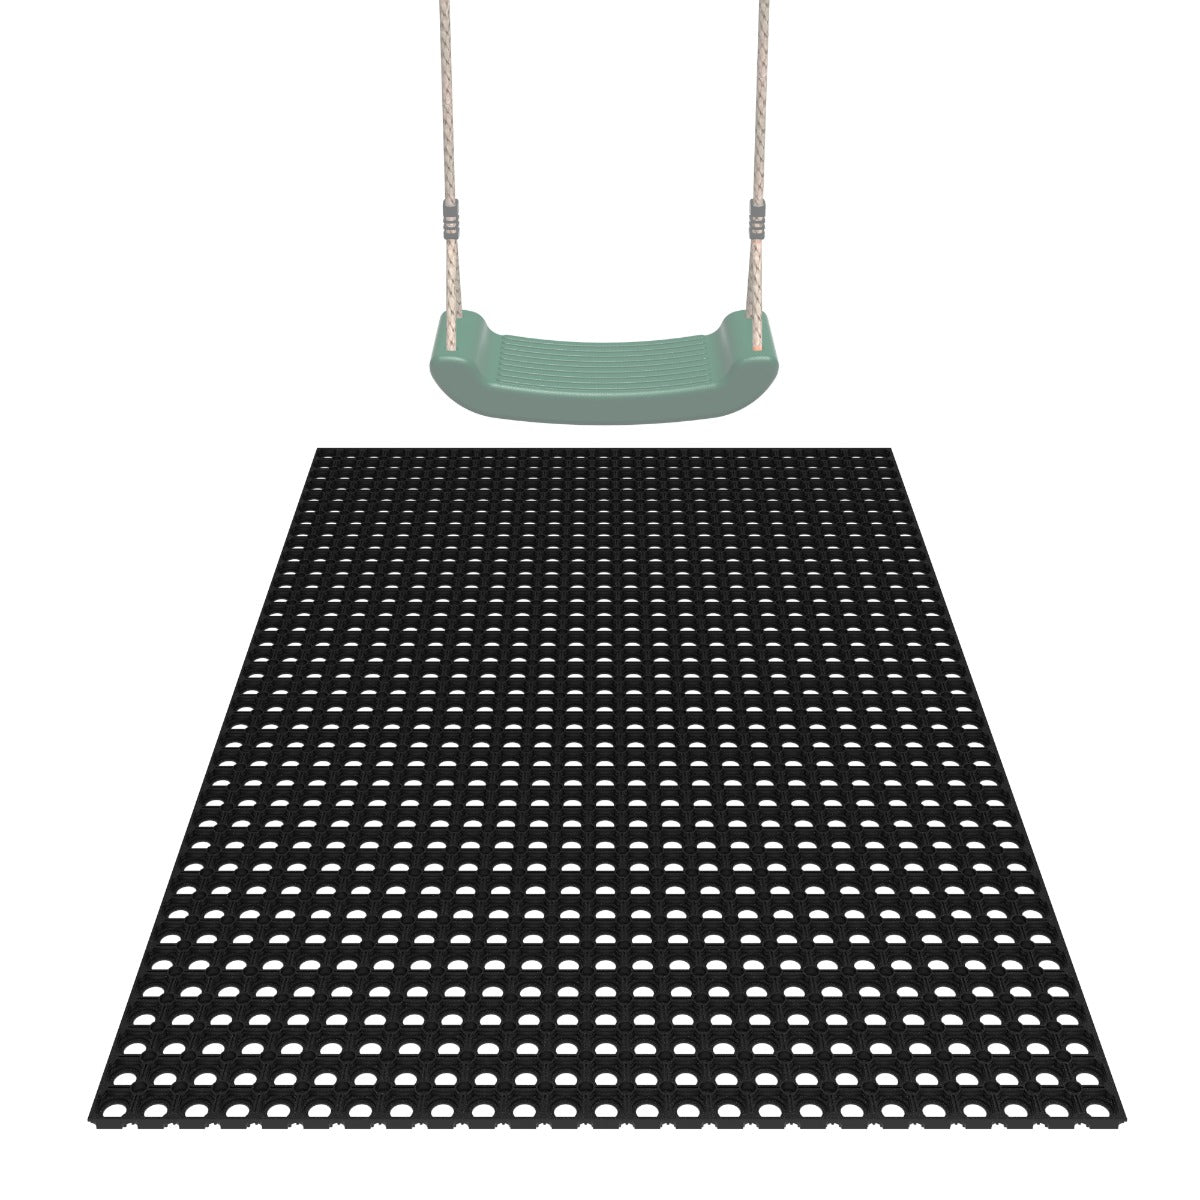 Grass Protection Rubber Matting 1 x 1.5M For Garden Play Equipment + 4 Pegs